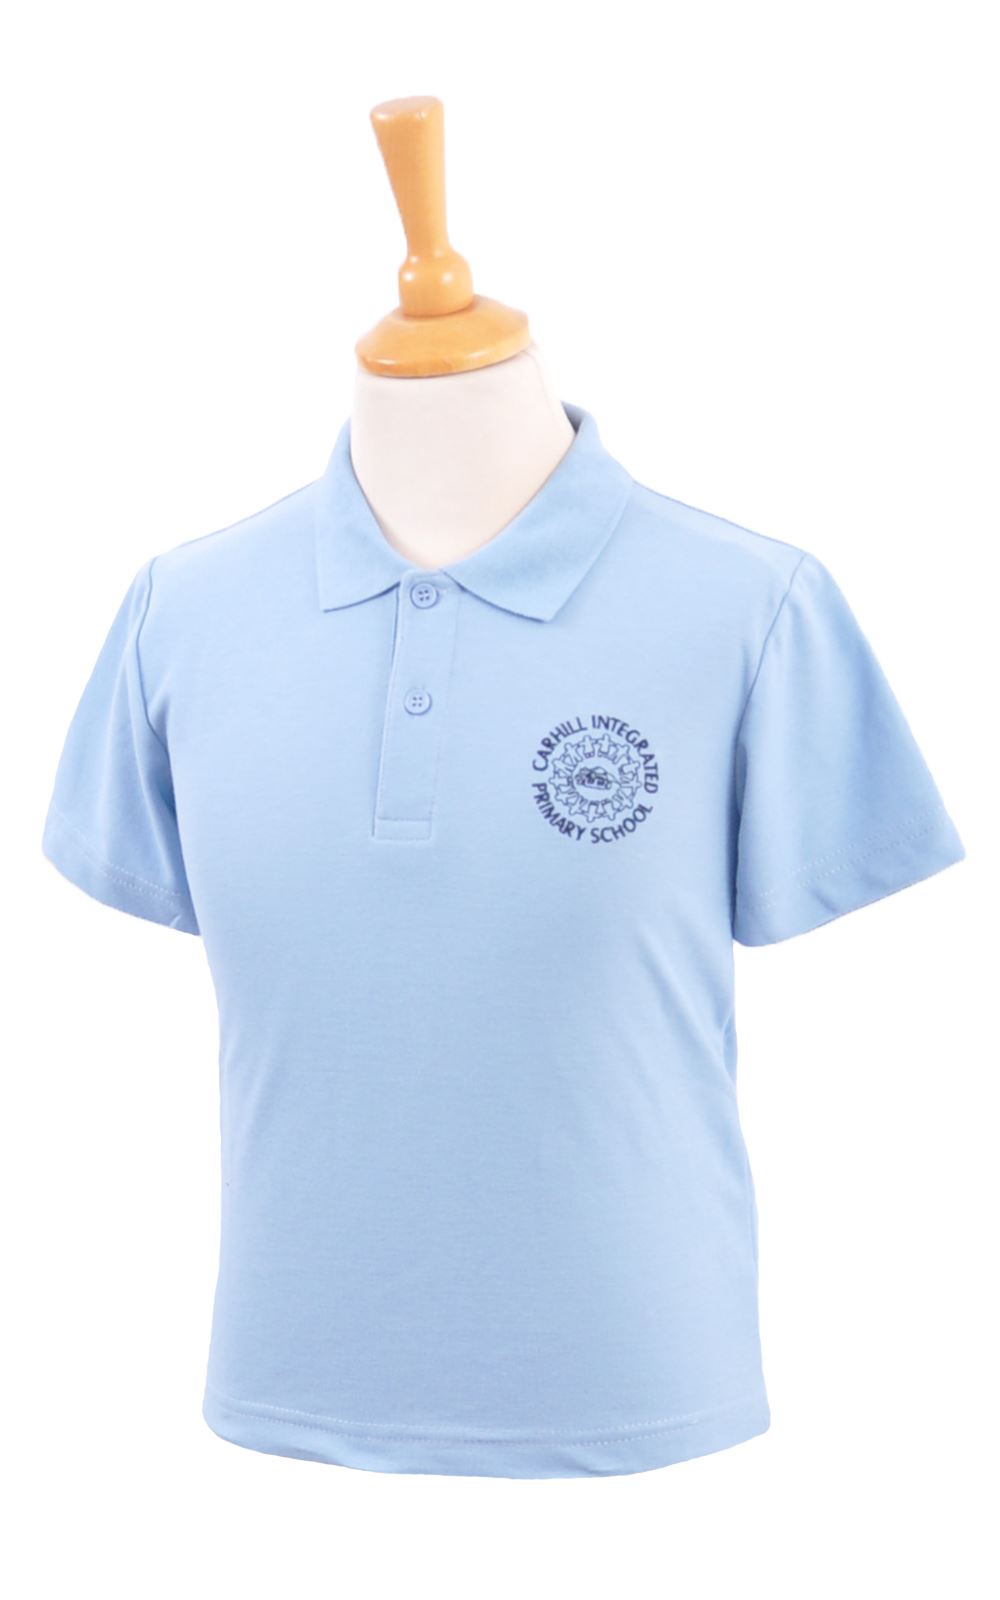 Picture of Carhill Integrated PS Polo Shirt - Woodbank